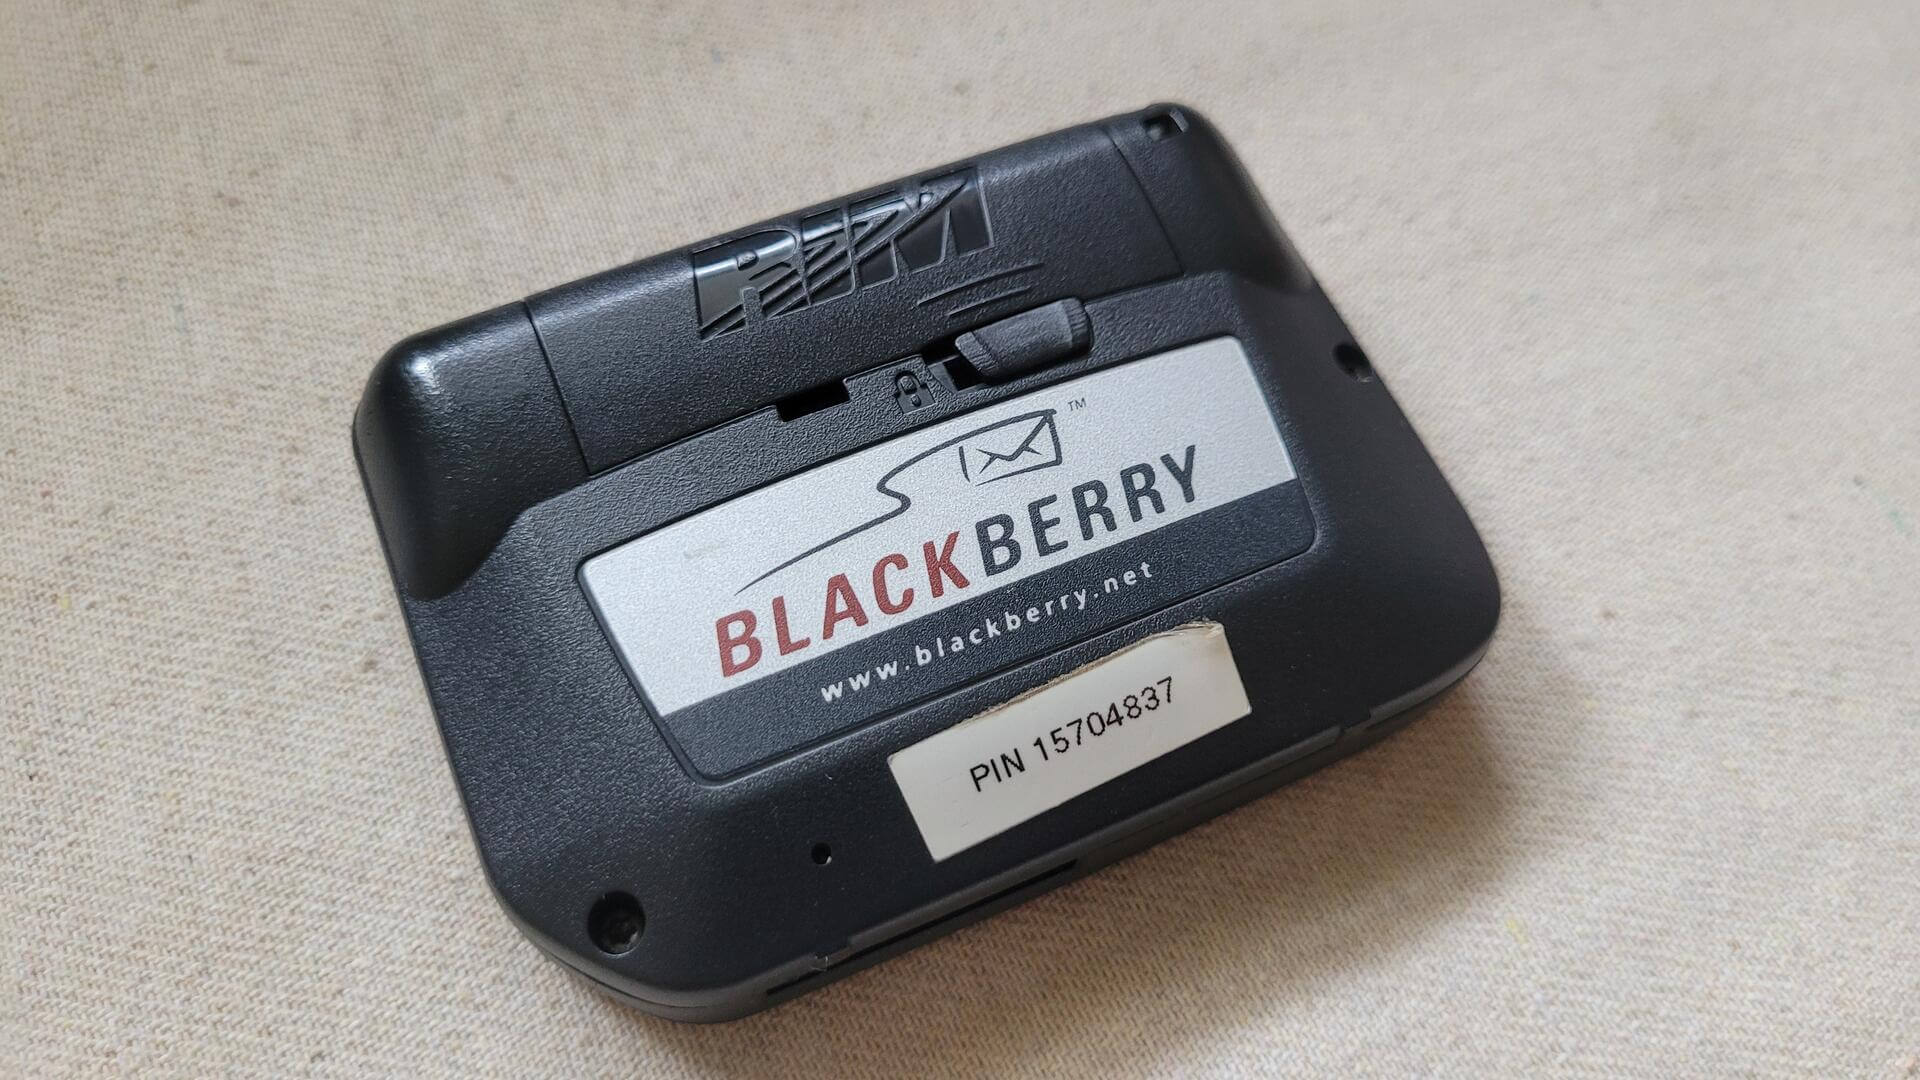 Rare Original RIM 950 BlackBerry Inter@ctive two way pager PDA w Holster - 1998 Blackberry Vintage Canadiana and Collectible Electronic Gadgets and Devices